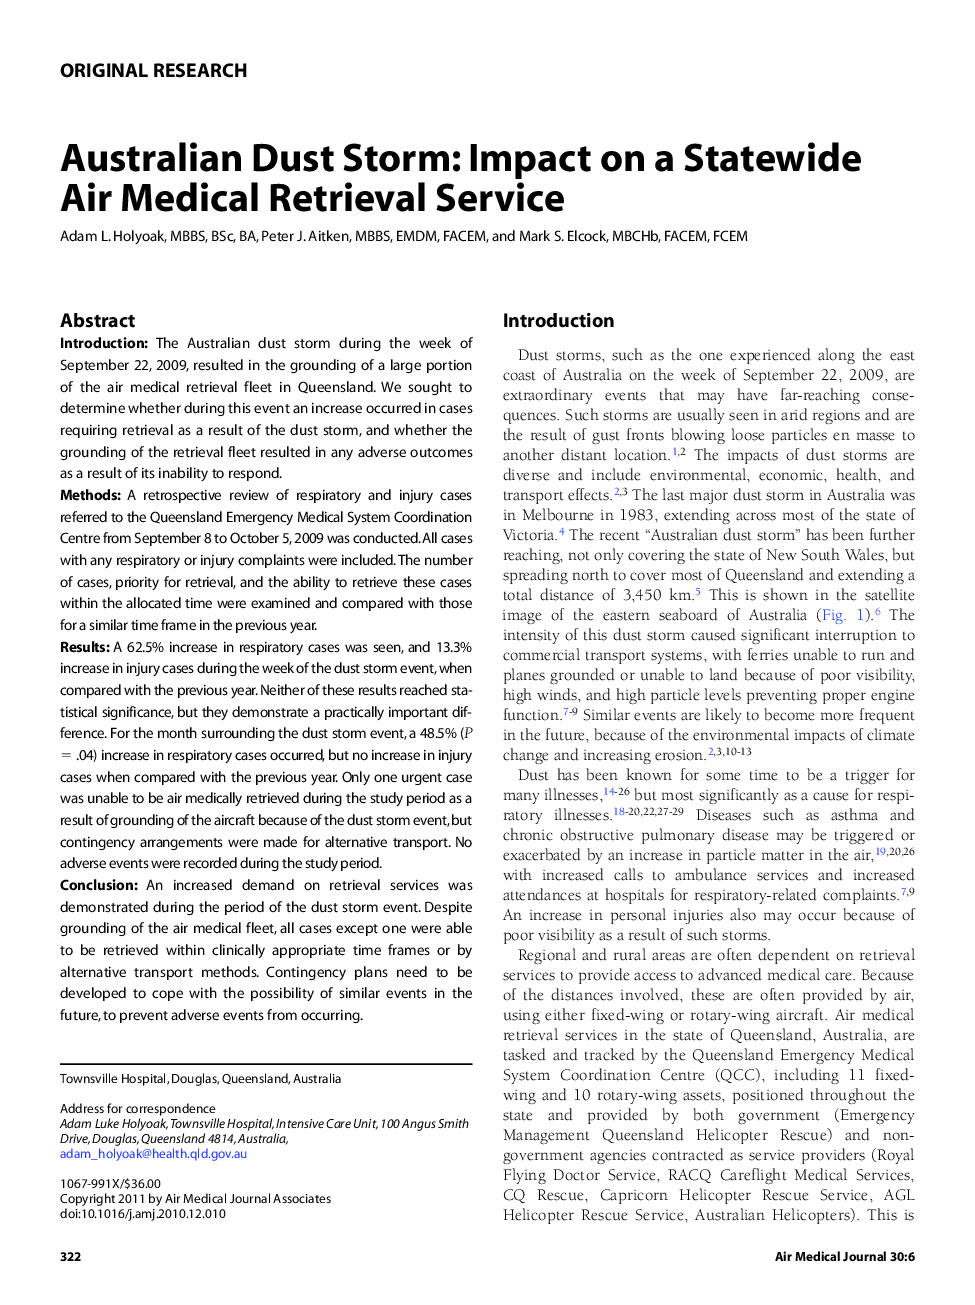 Australian Dust Storm: Impact on a Statewide Air Medical Retrieval Service